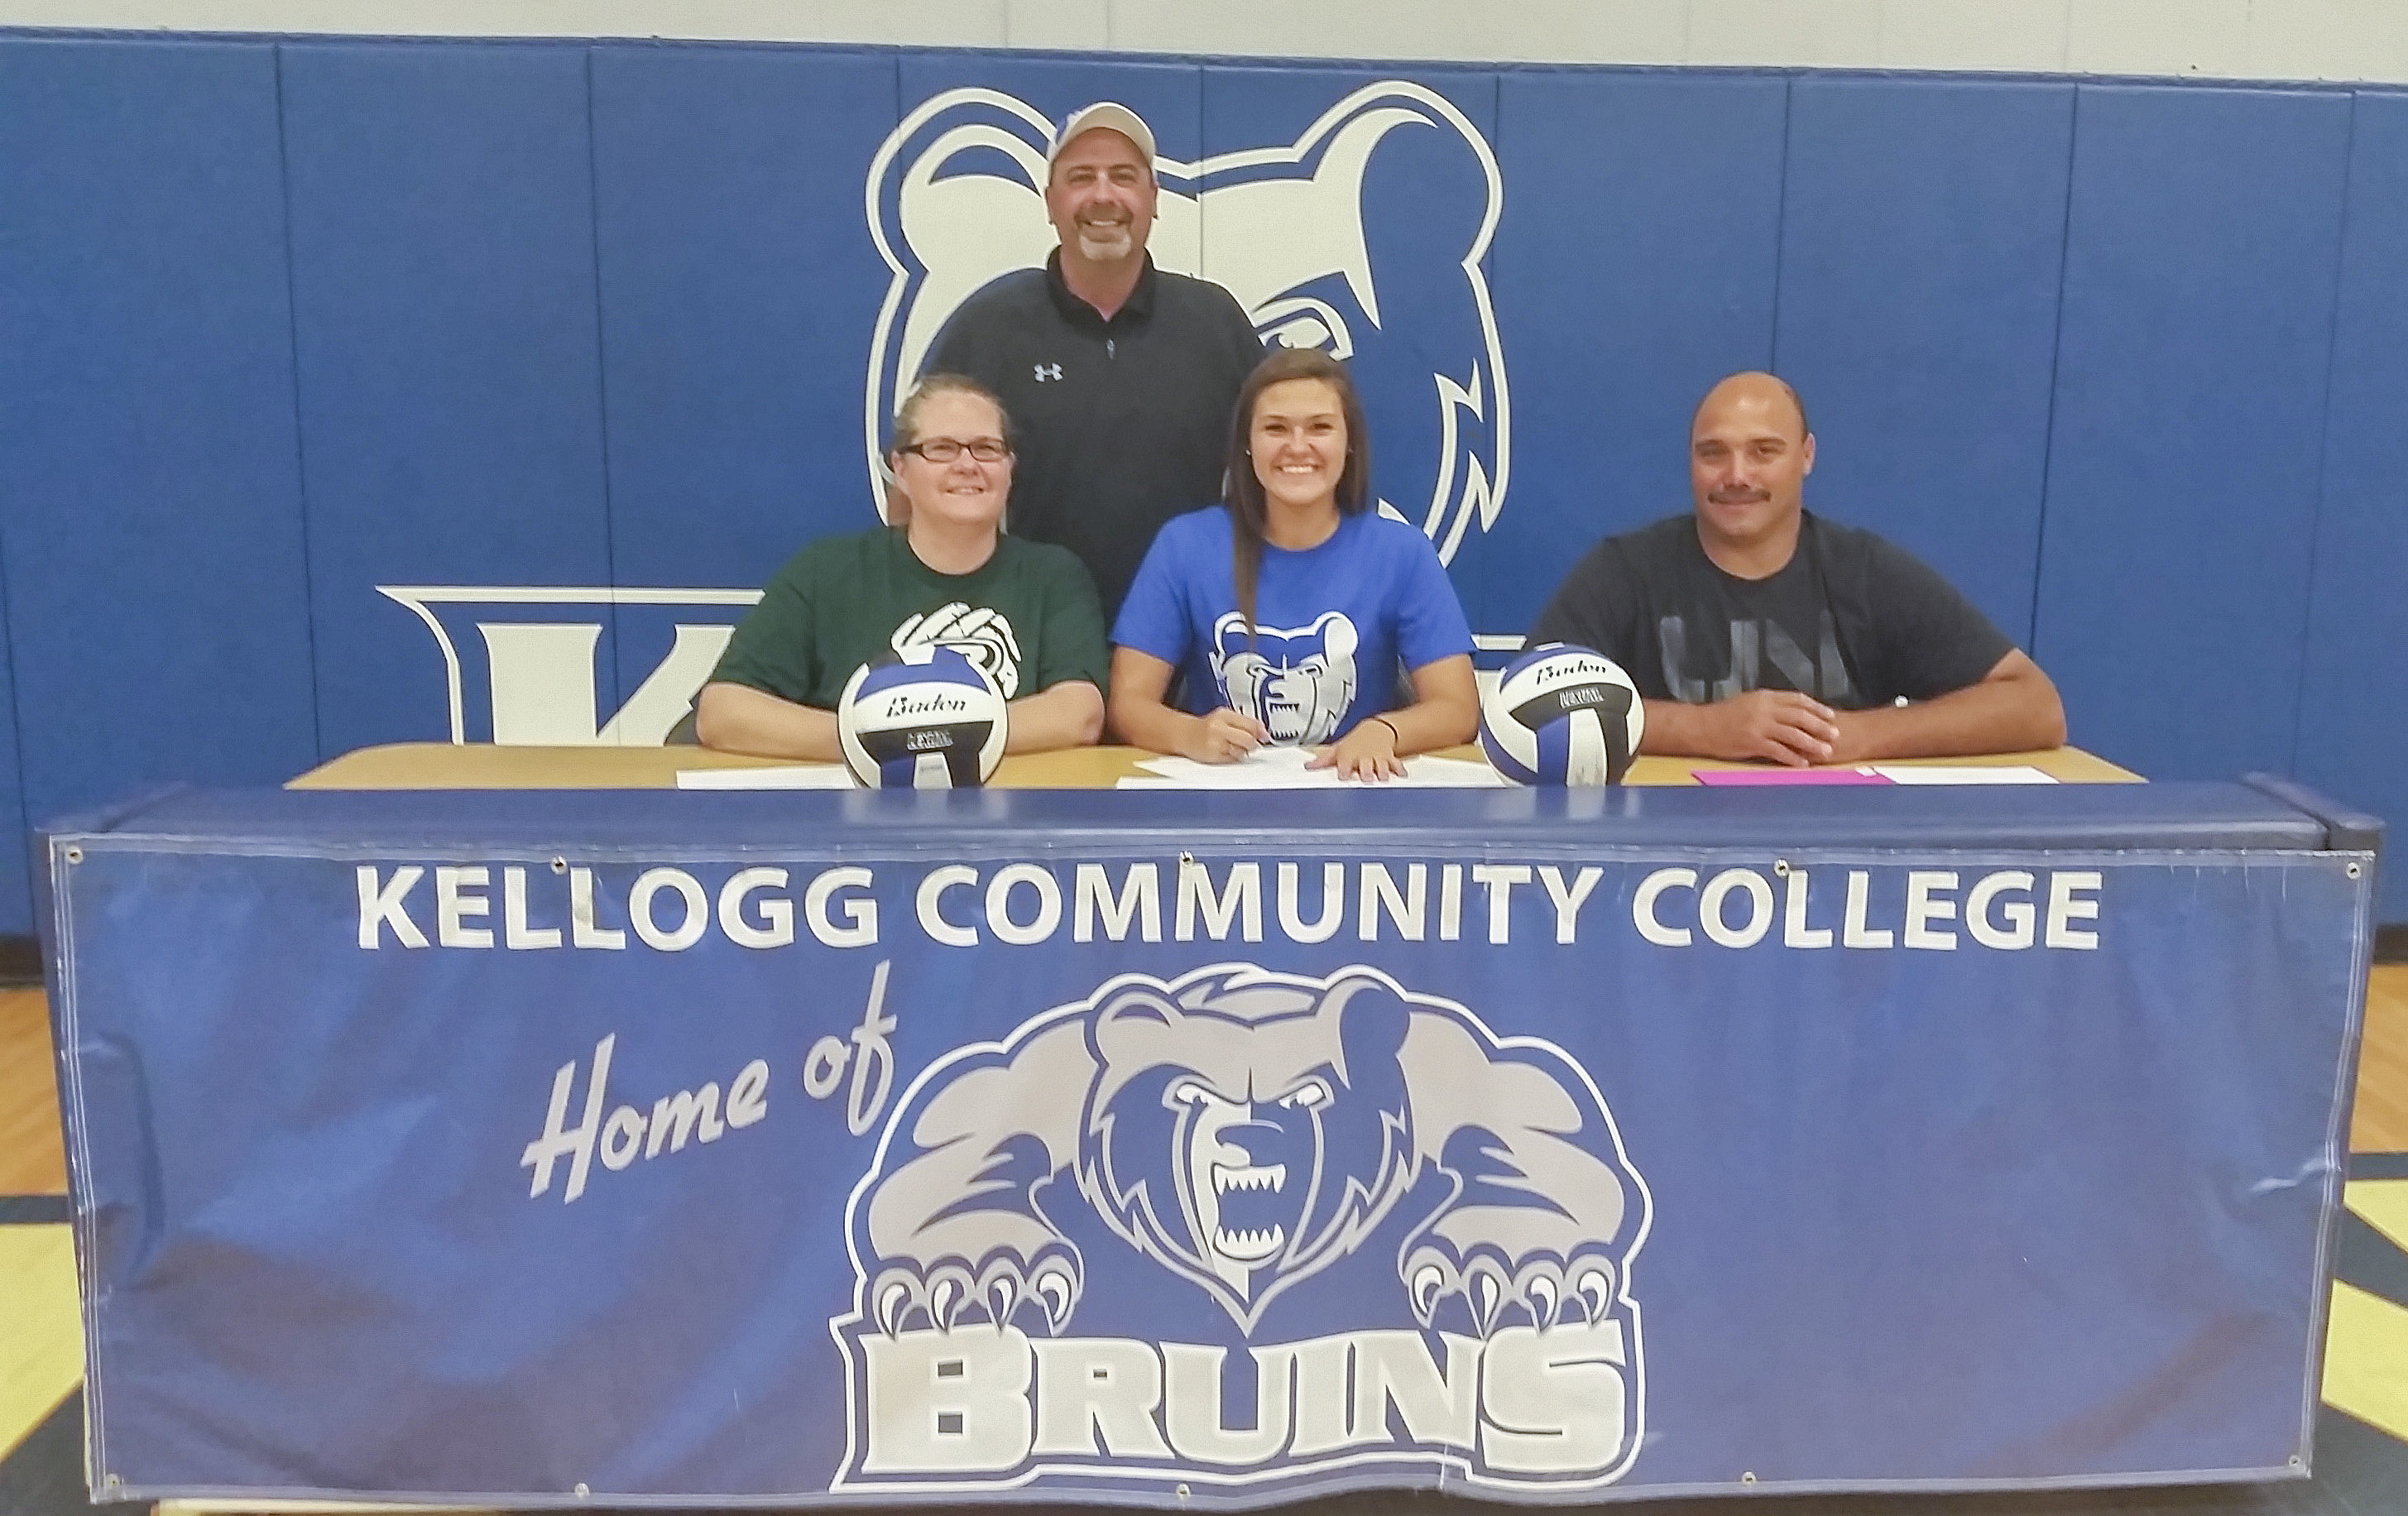 Pictured in this signing photo are, in the front row, from left to right, Susan Ritter (mother), Aubrey Ritter and Donnie Ritter (father); and in the back row, KCC's head women's volleyball coach Tom VanWienen.